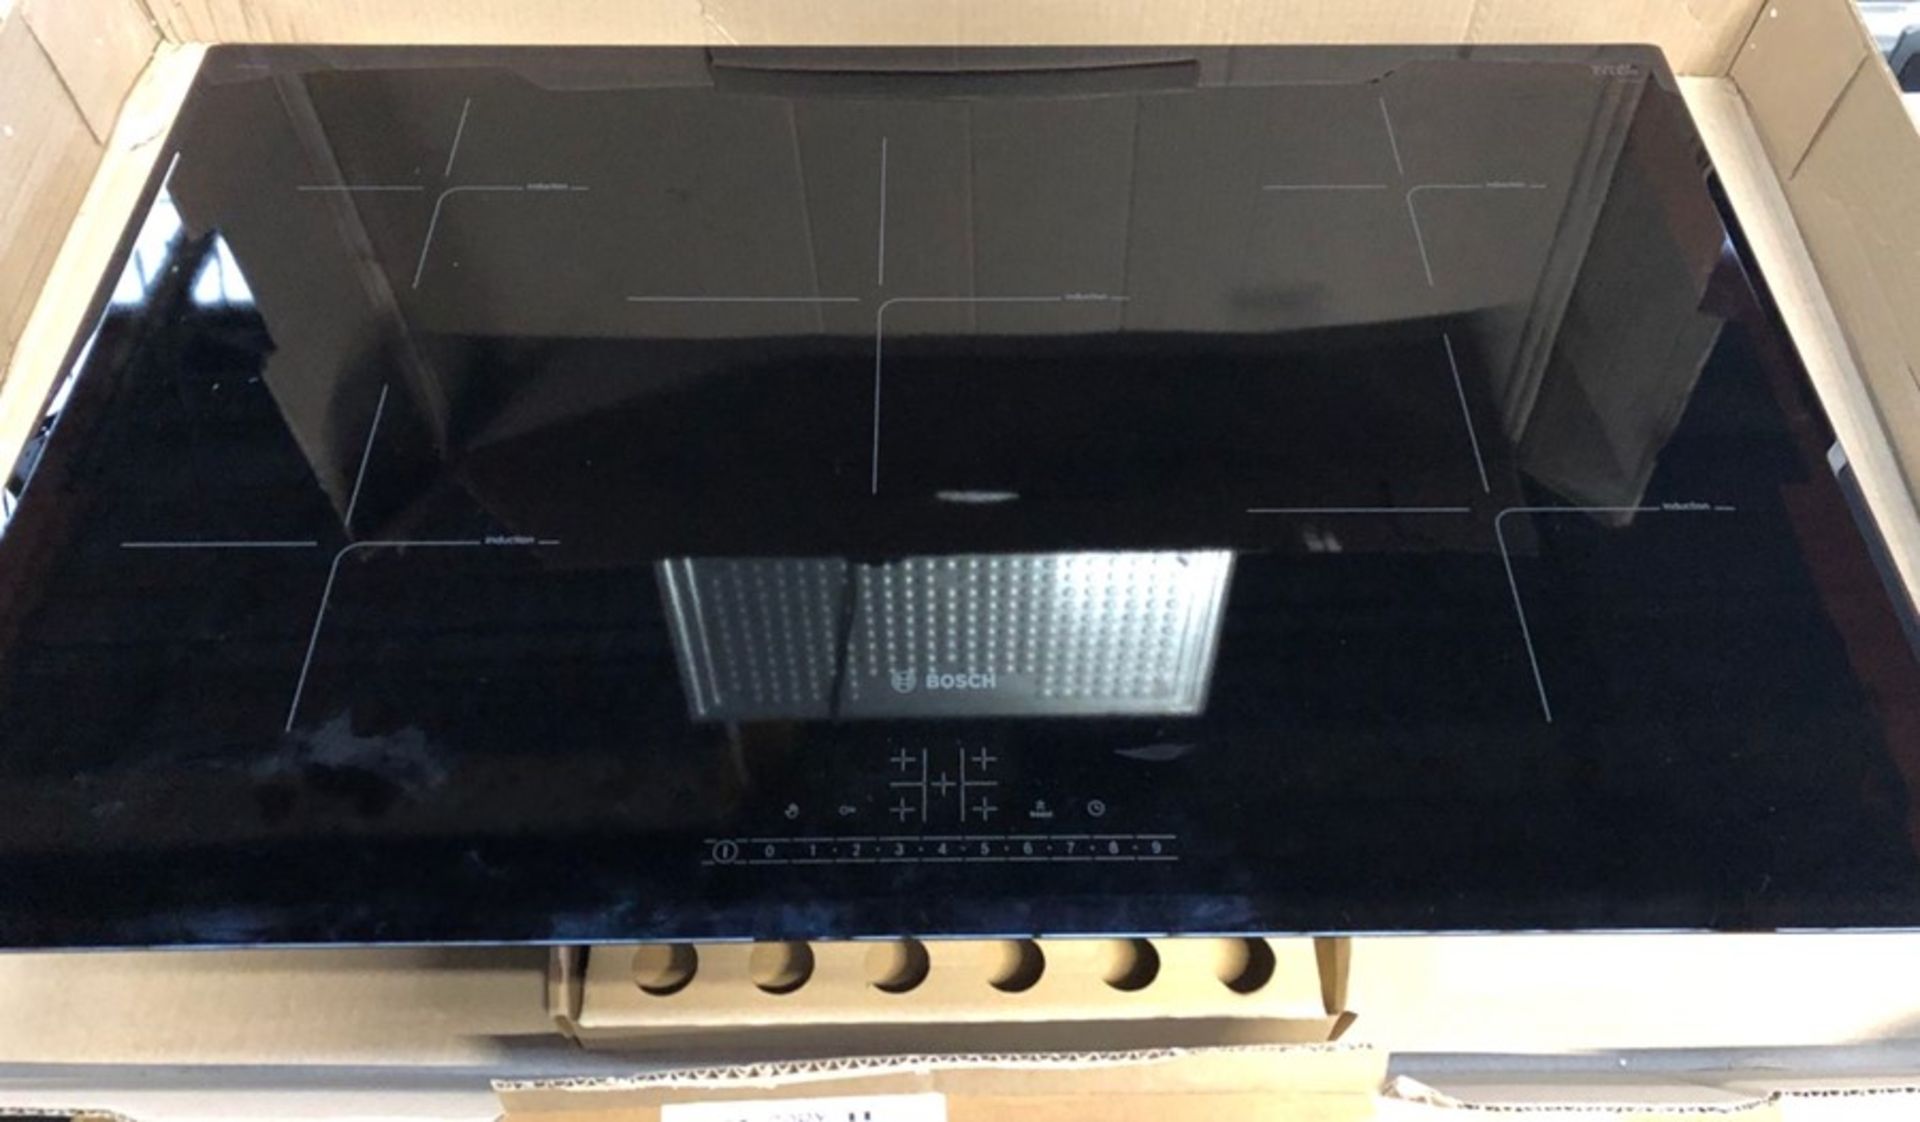 BOSCH PIV851FB1E INDUCTION HOB IN BLACK - Image 3 of 4